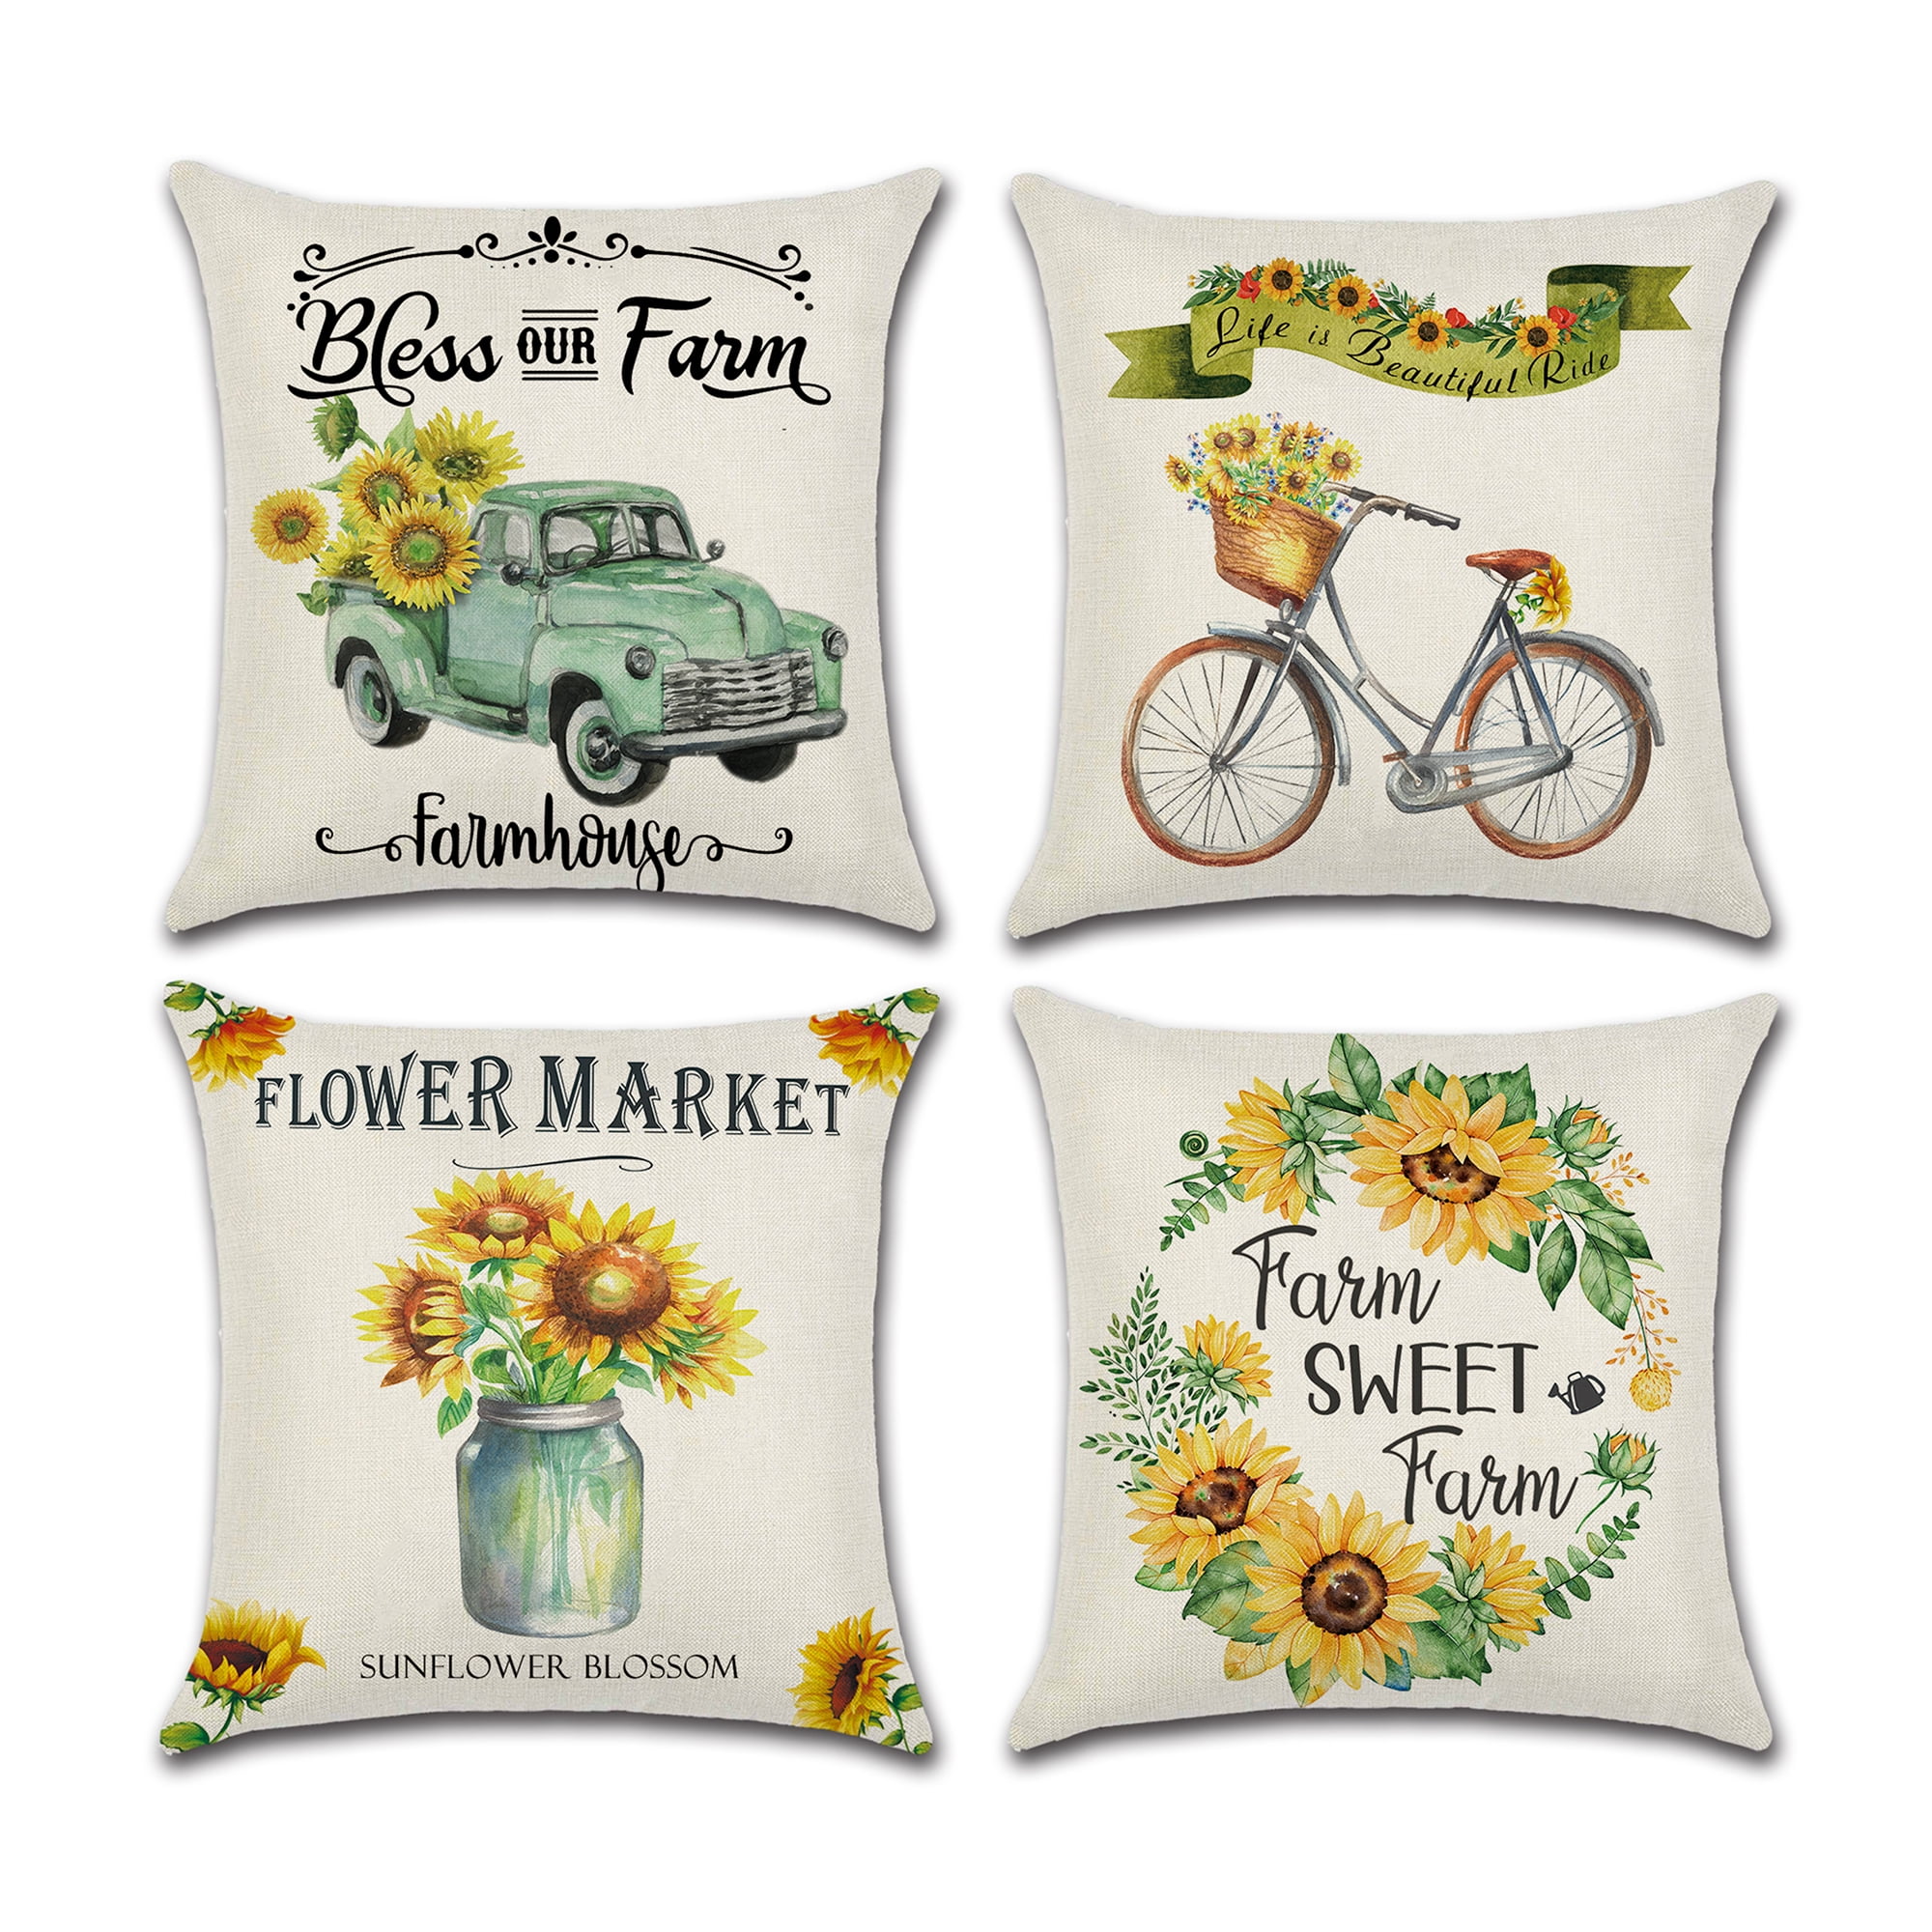 Asamour Sunflower Throw Pillow Covers Cotton Linen Vintage Yellow Flower and Green Leaves Spring Summer Decorative Pillow Case Cotton Linen Farmhouse Cushion Cover Square 18x18 Inches Sunflower 